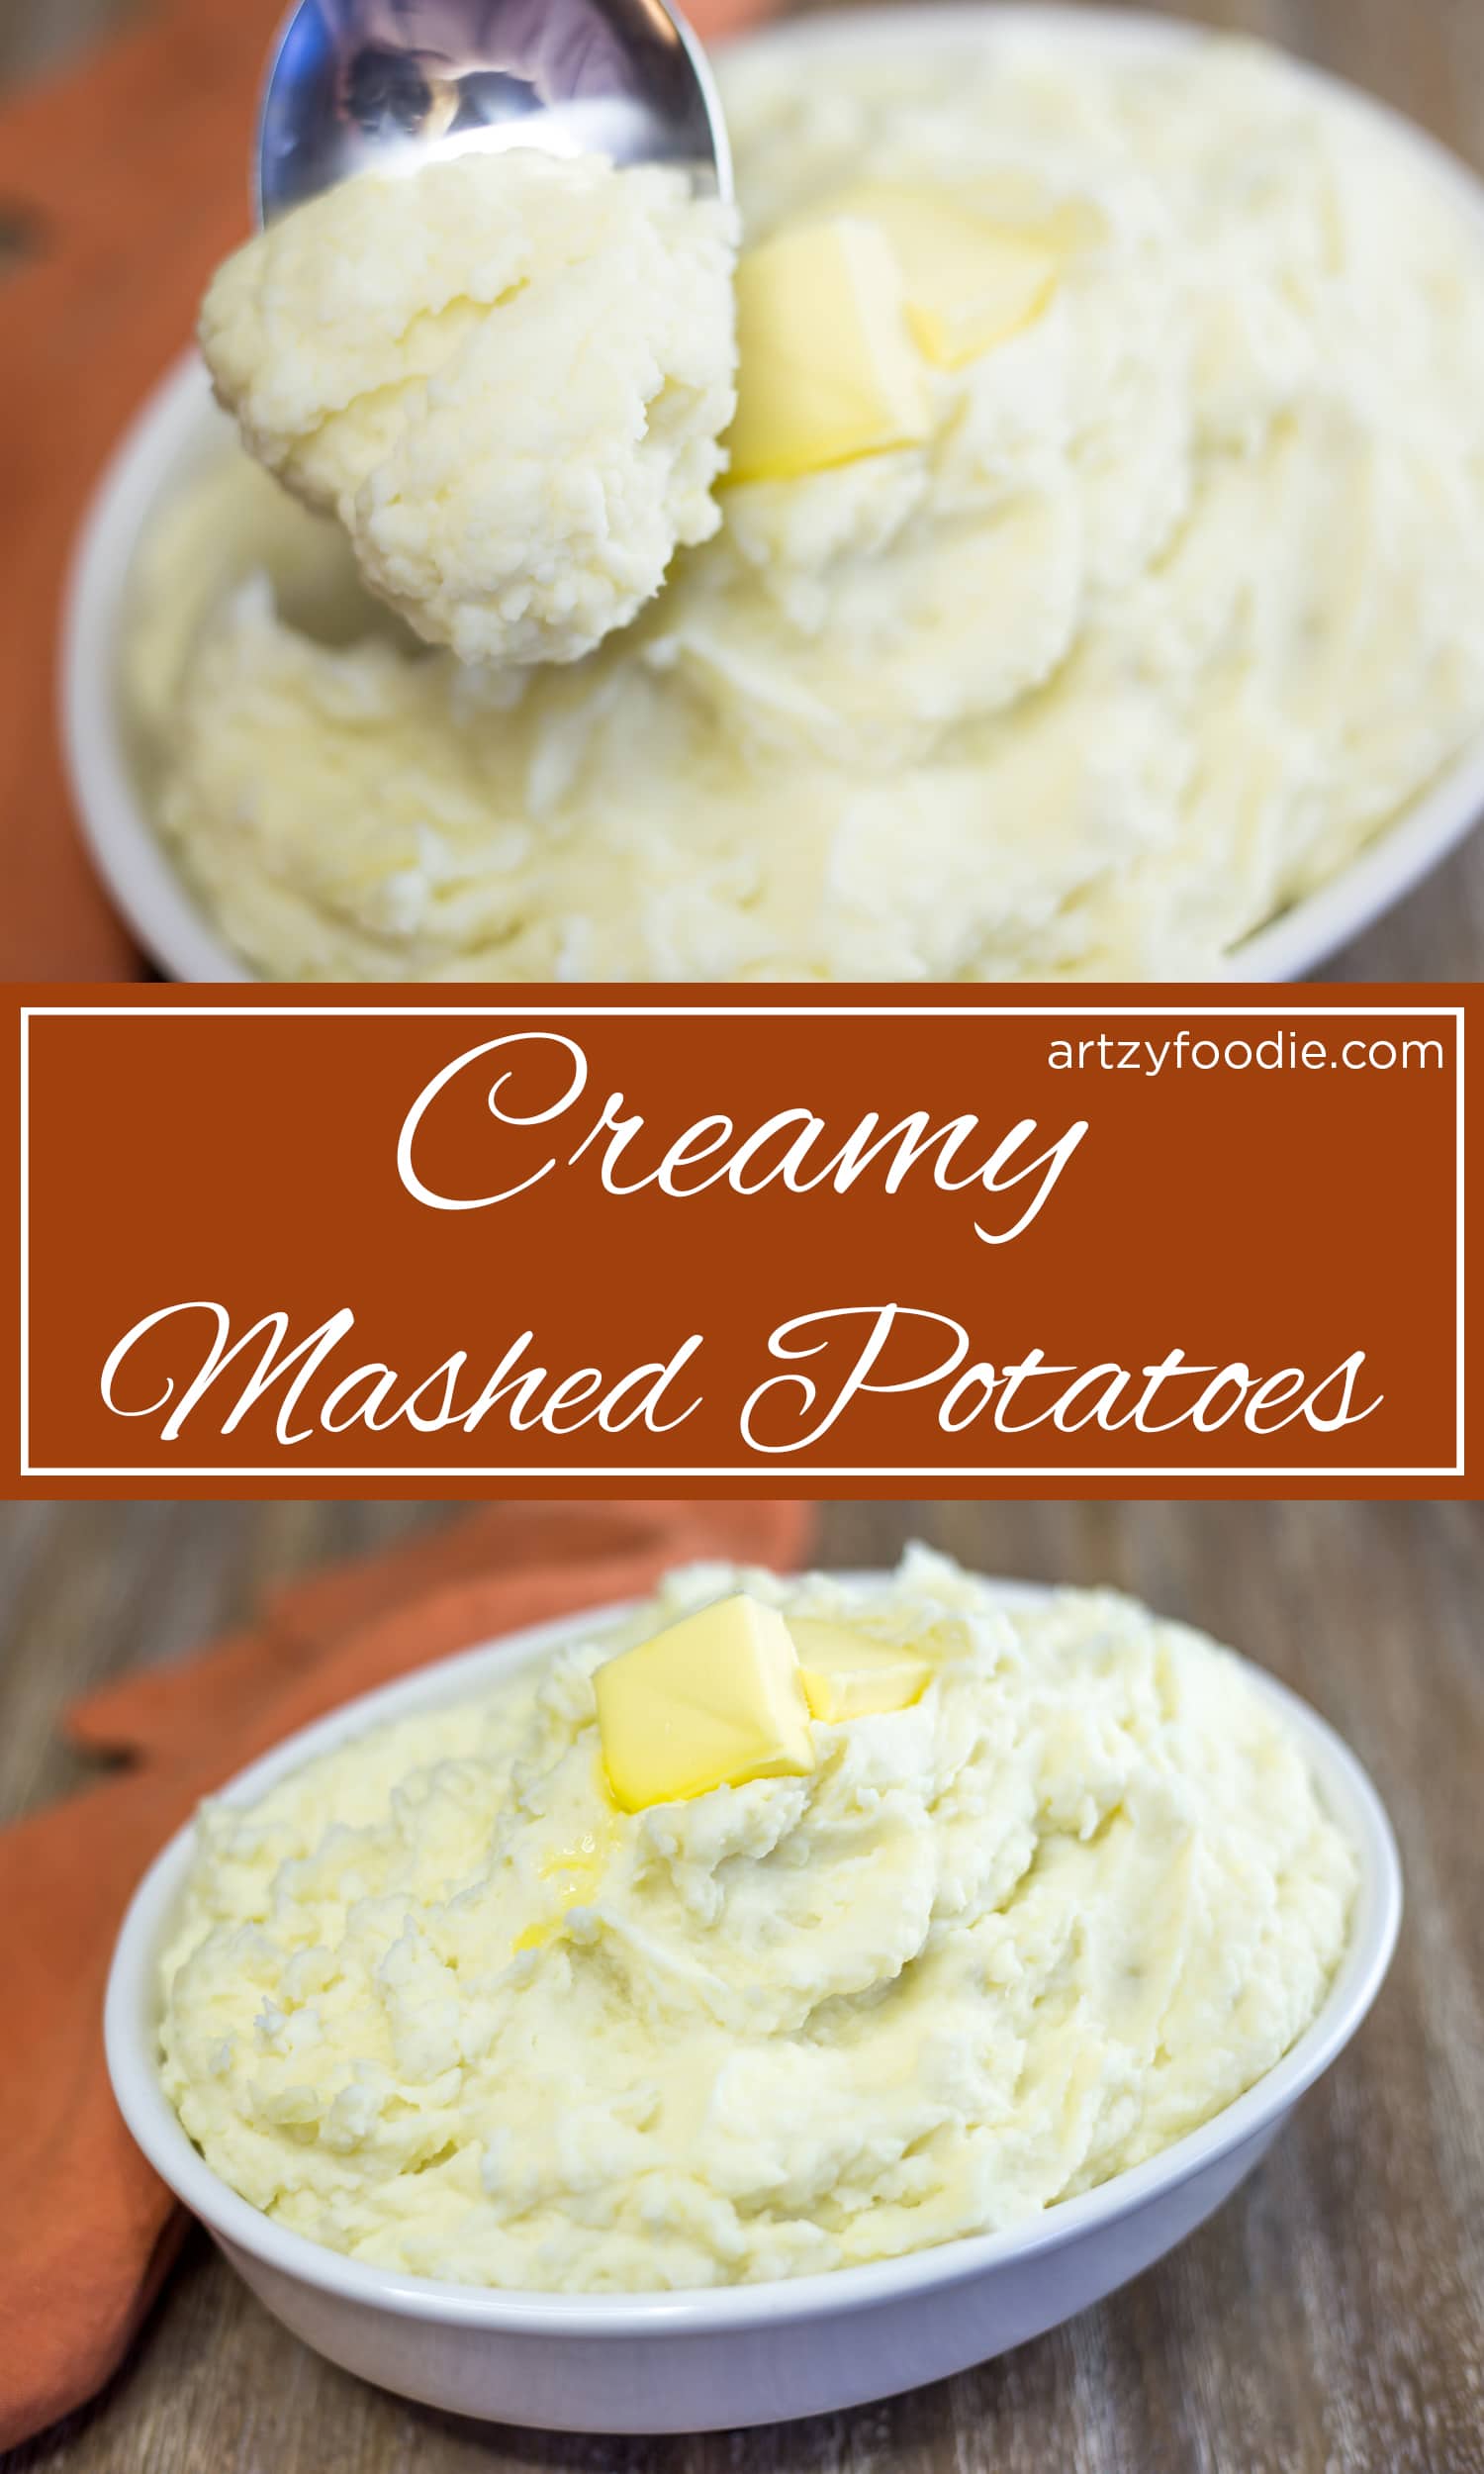 These creamy potatoes with garlic infused heavy cream, butter, sour cream, and salt can’t be beat! |artzyfoodie.com|